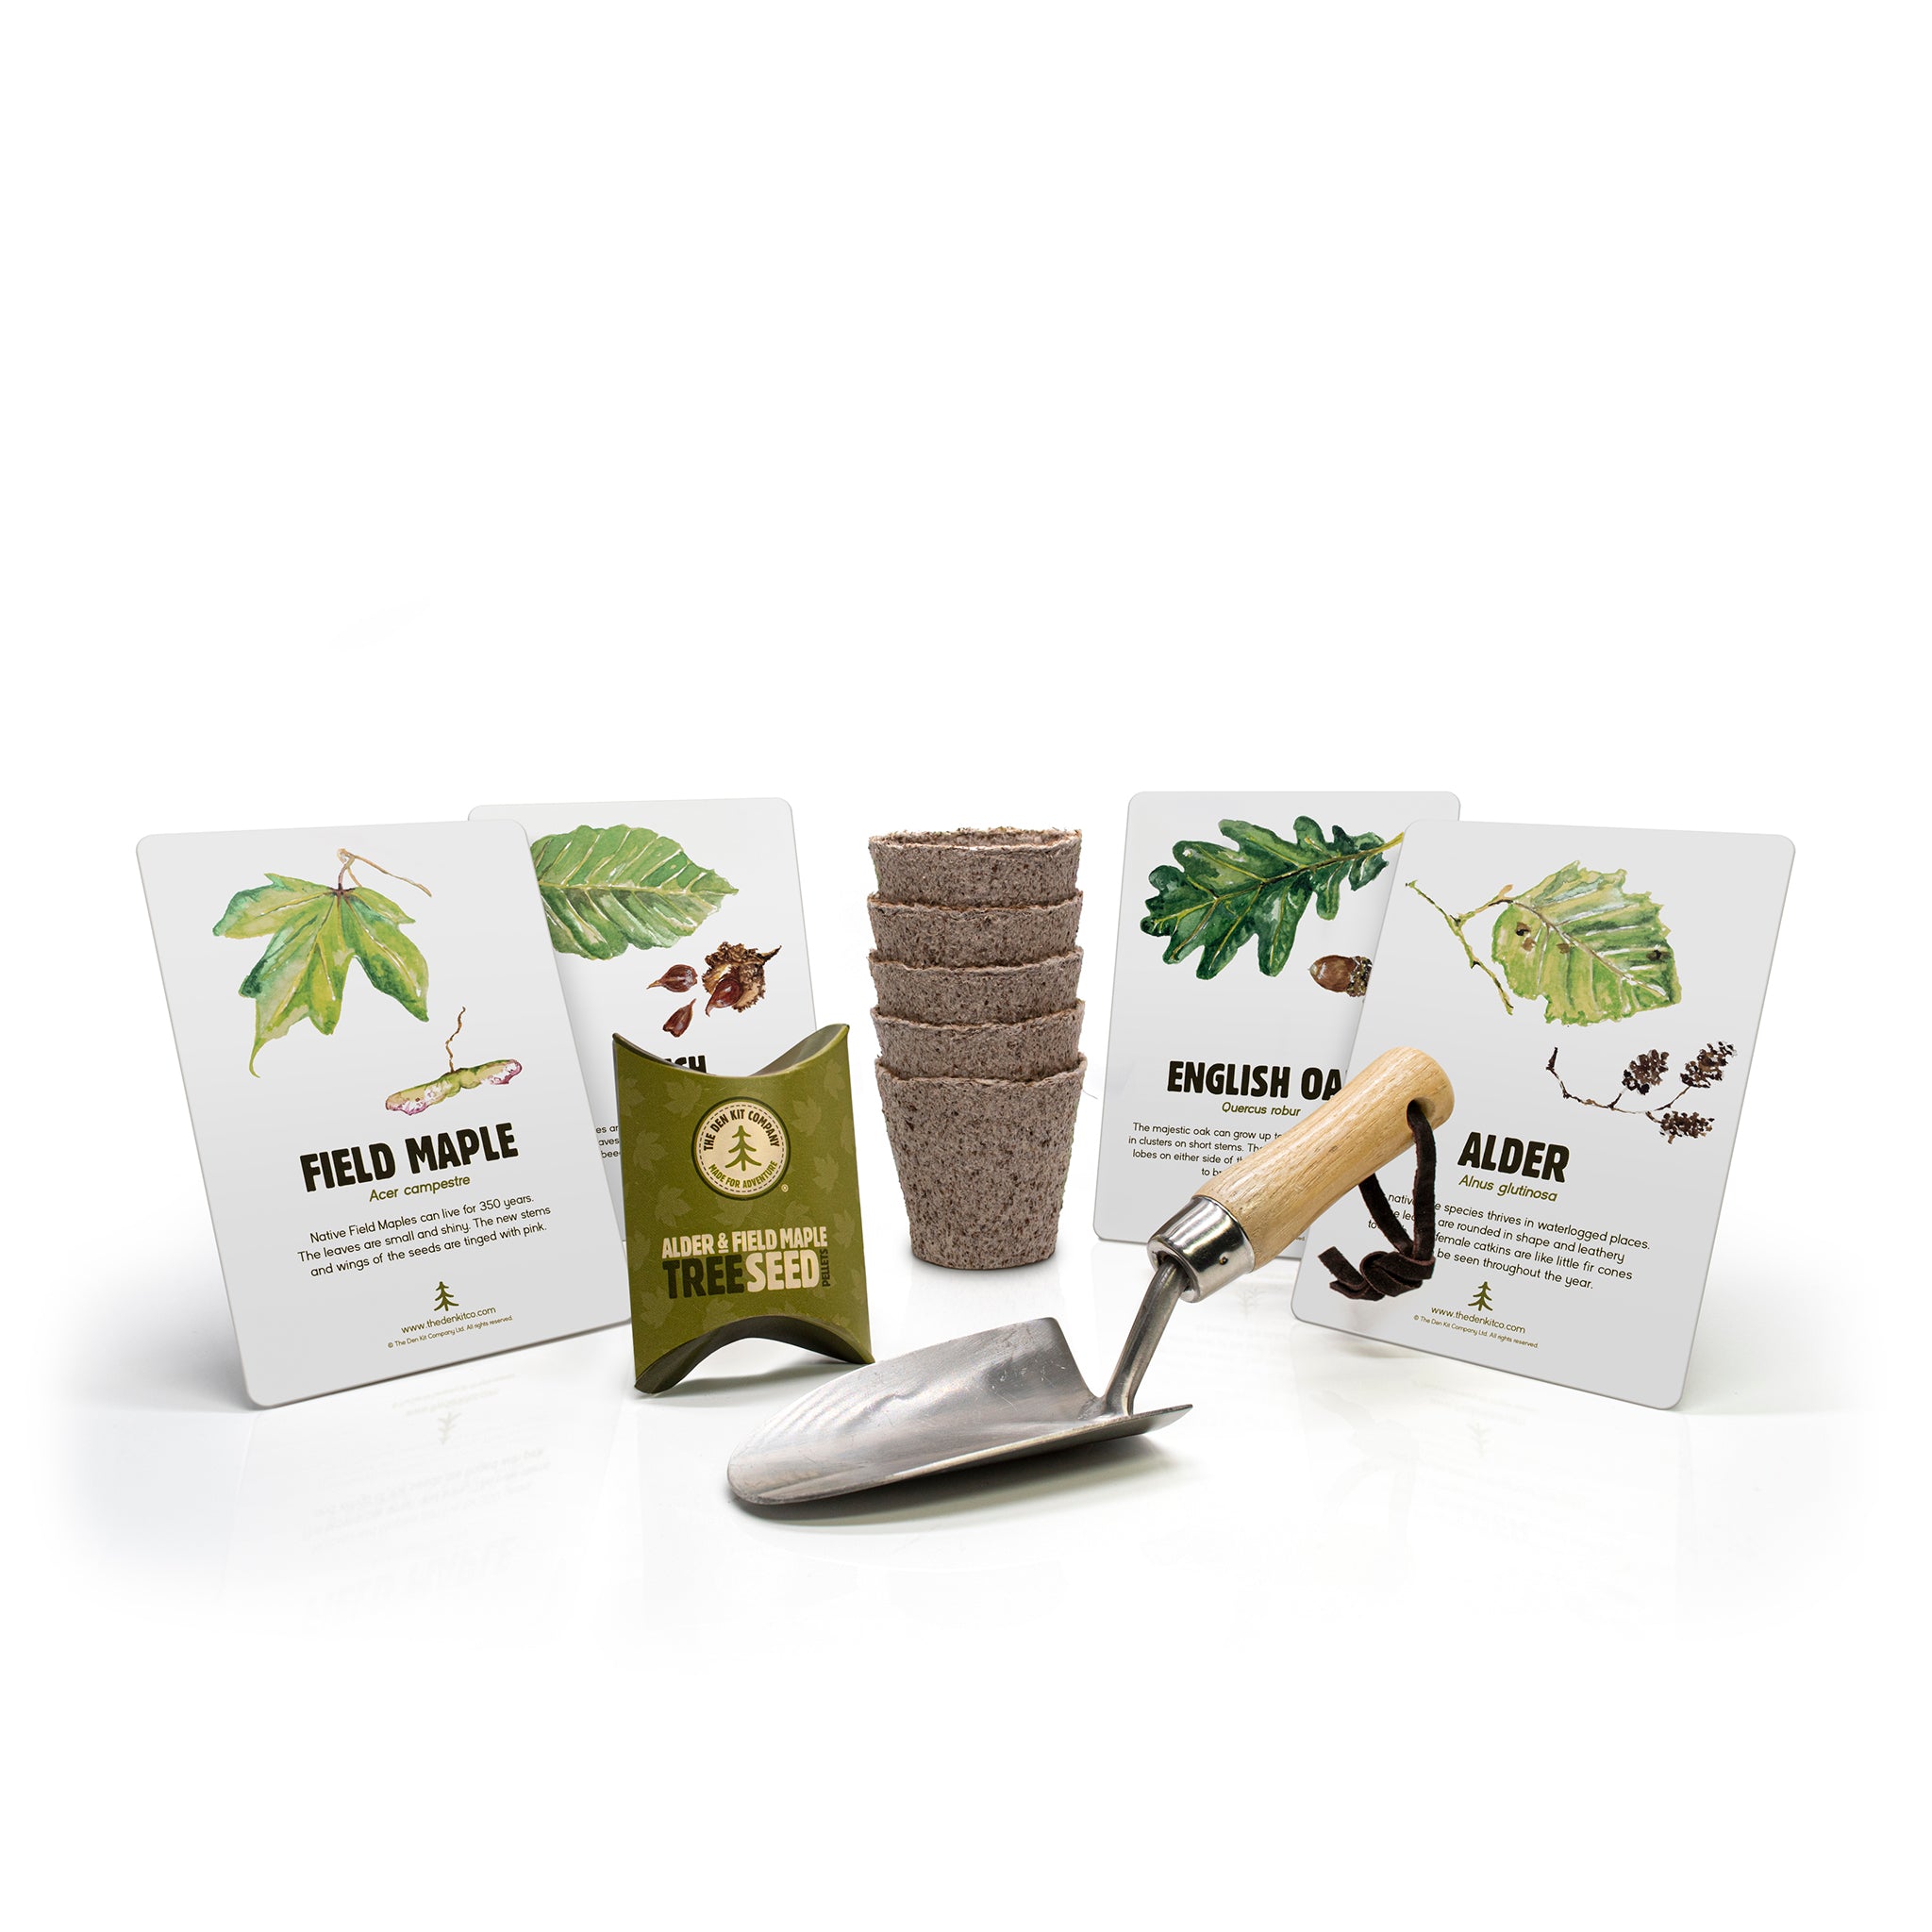 Contents of the plant a tree kit up against a white background, including tree identification cards, ash wooden handled trowel and tree seeds.